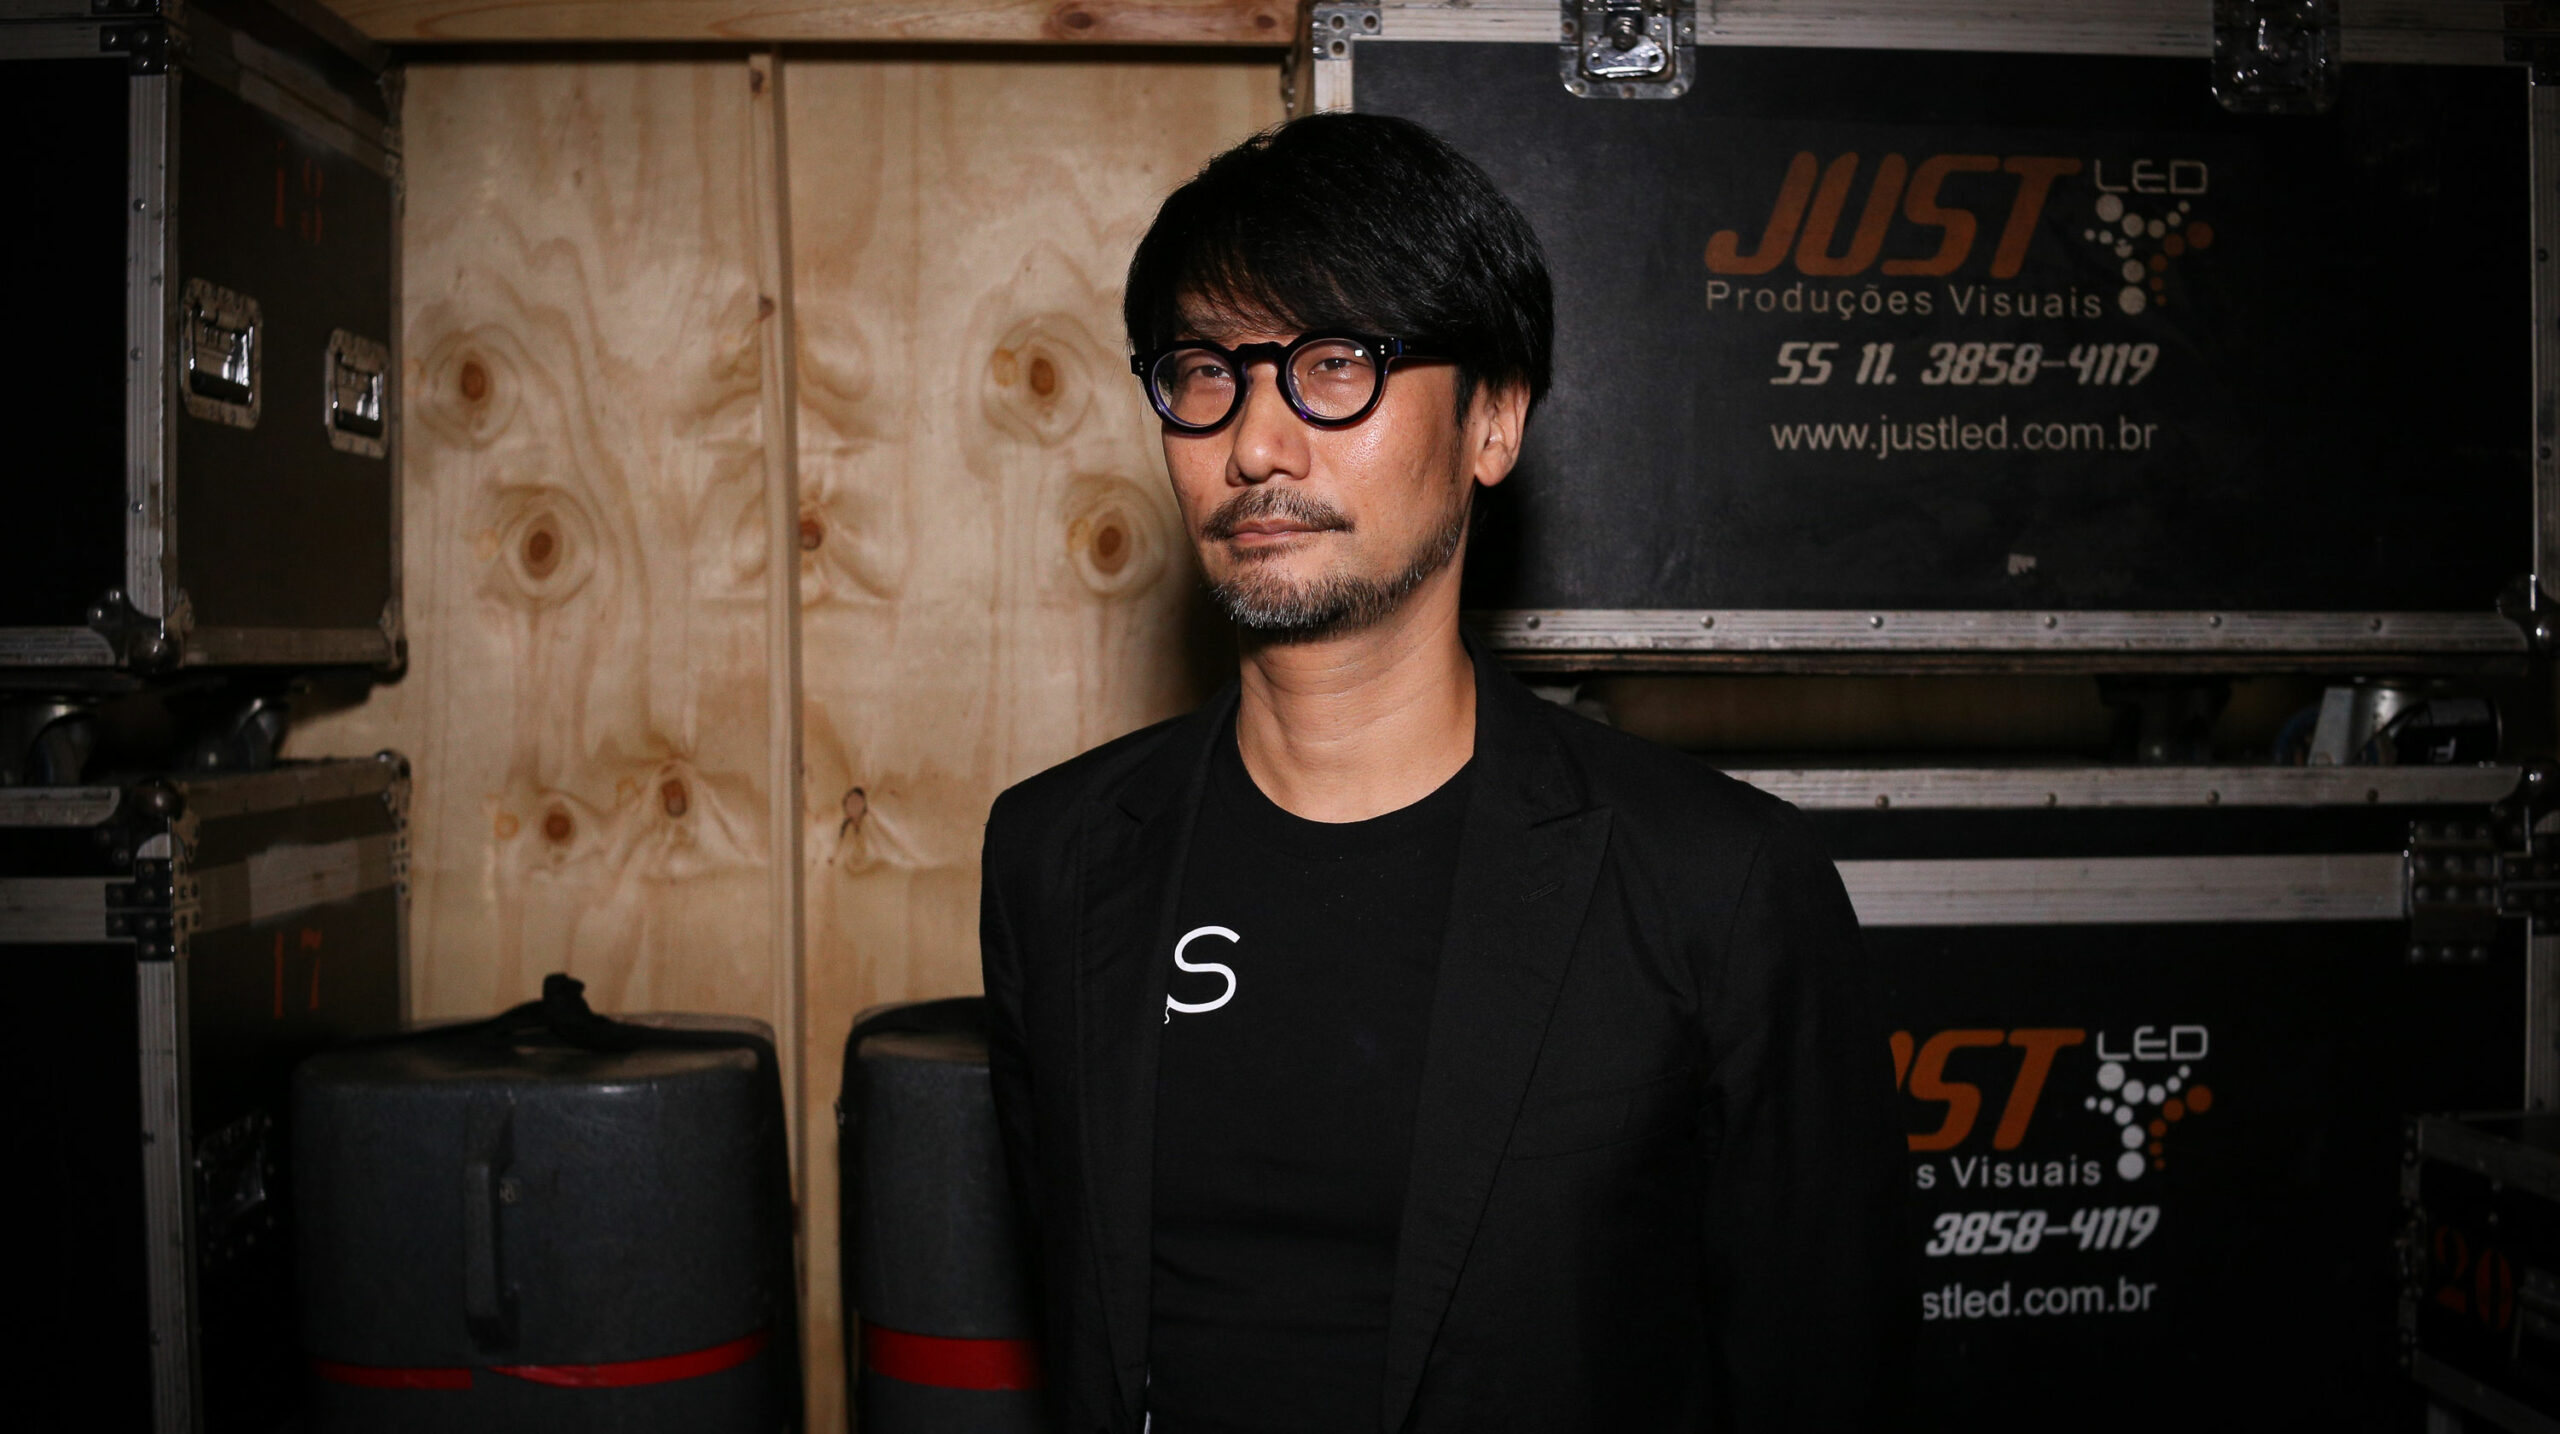 Hideo Kojima considers legal action after being wrongfully linked to former Japanese PM shooter